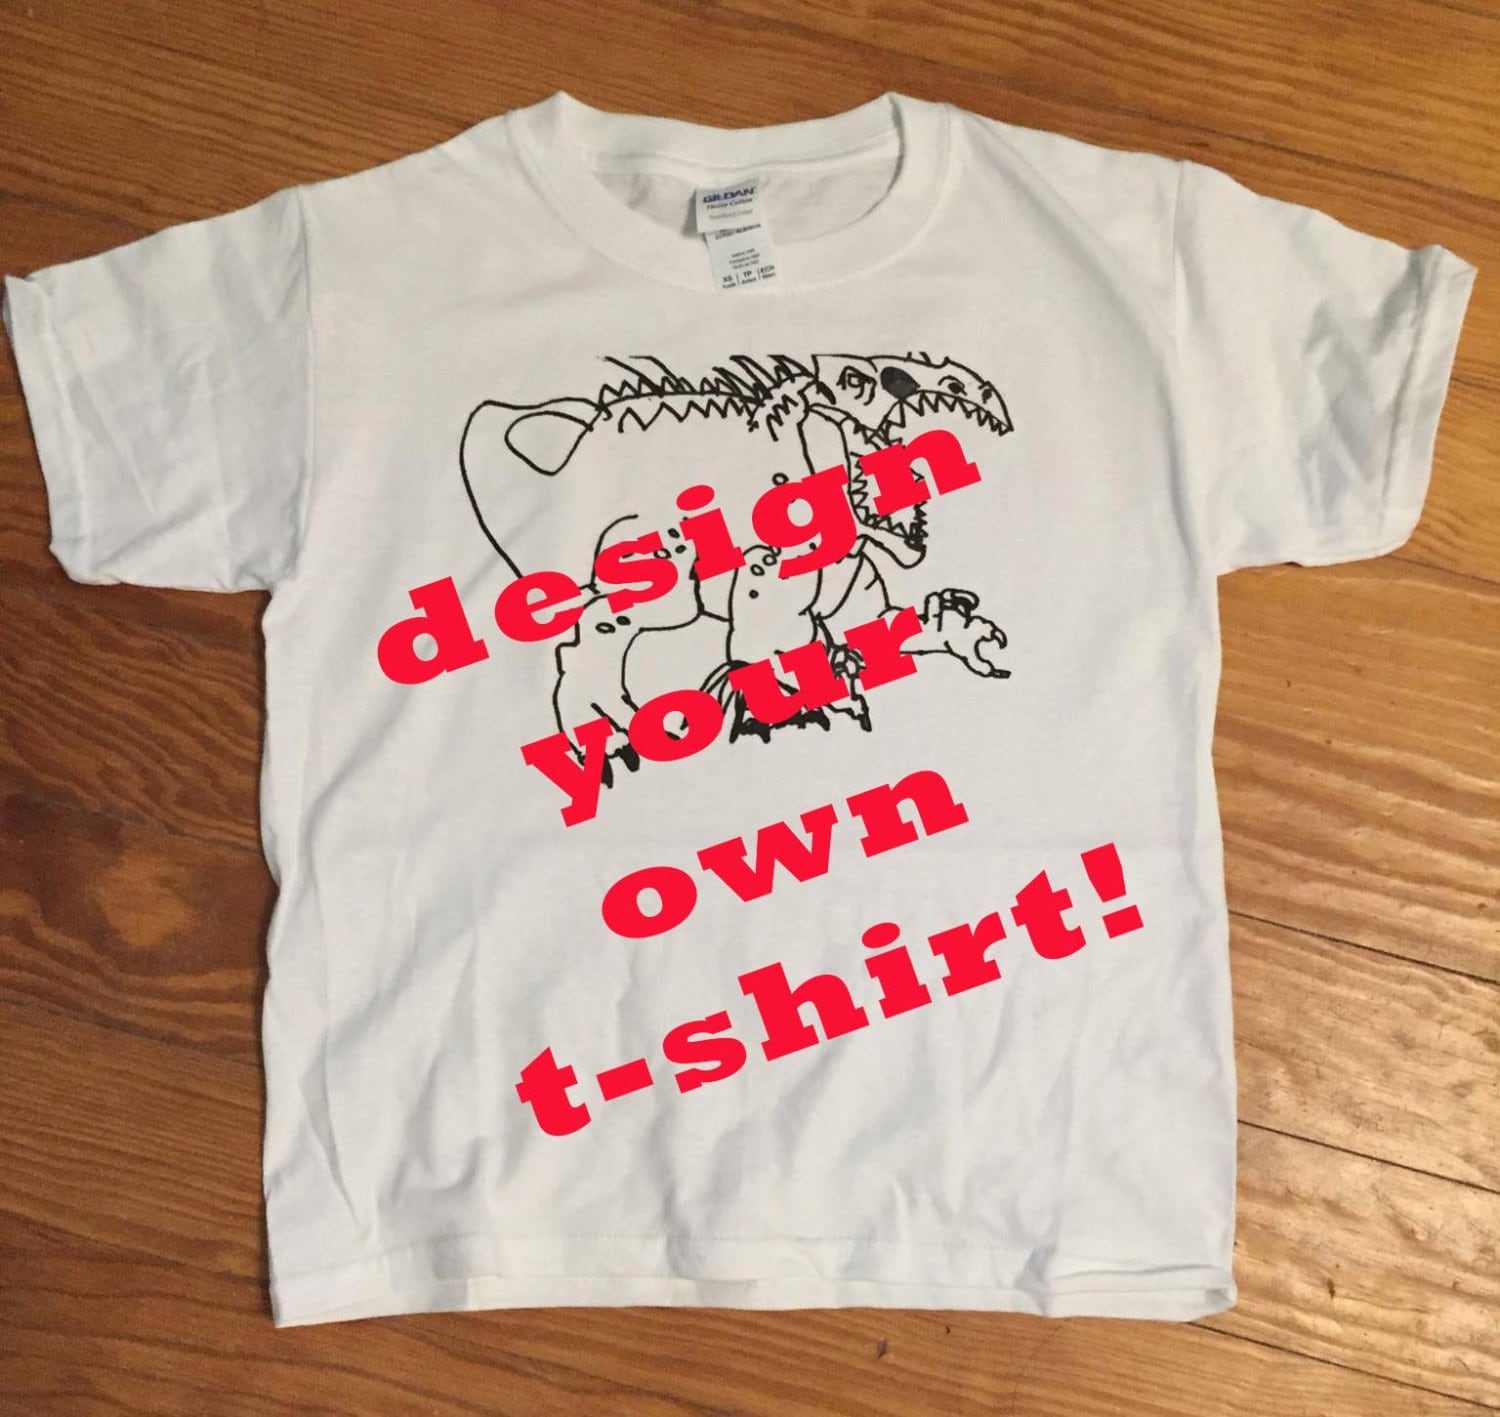 create your own shirt design